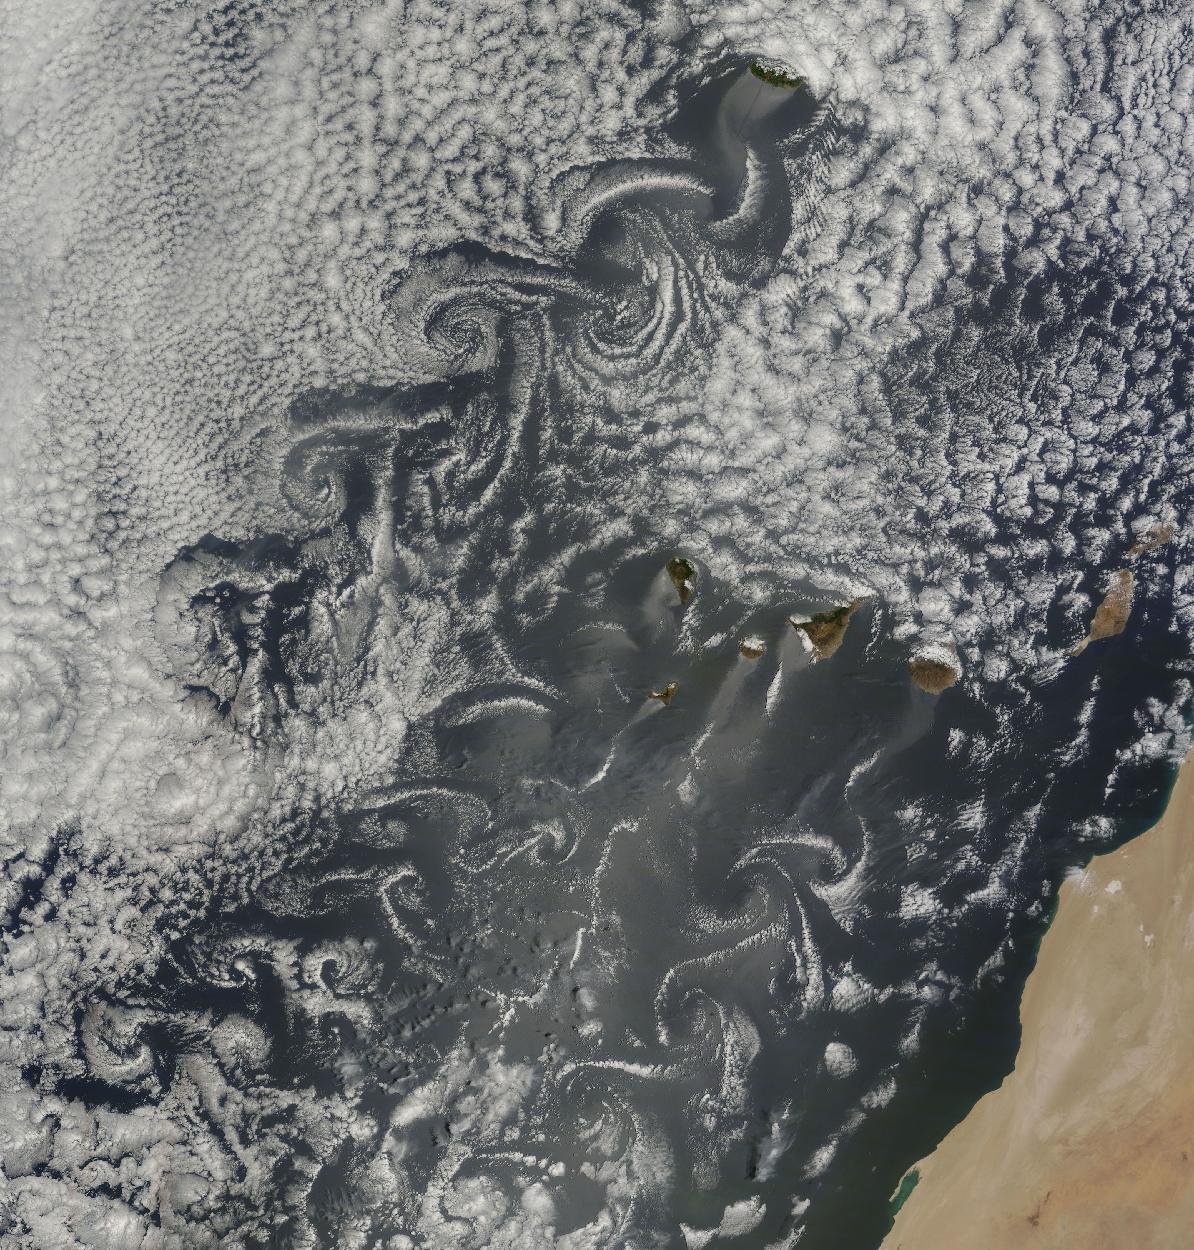 Satellite image of clouds over the ocean forming vortices due to passing over islands.